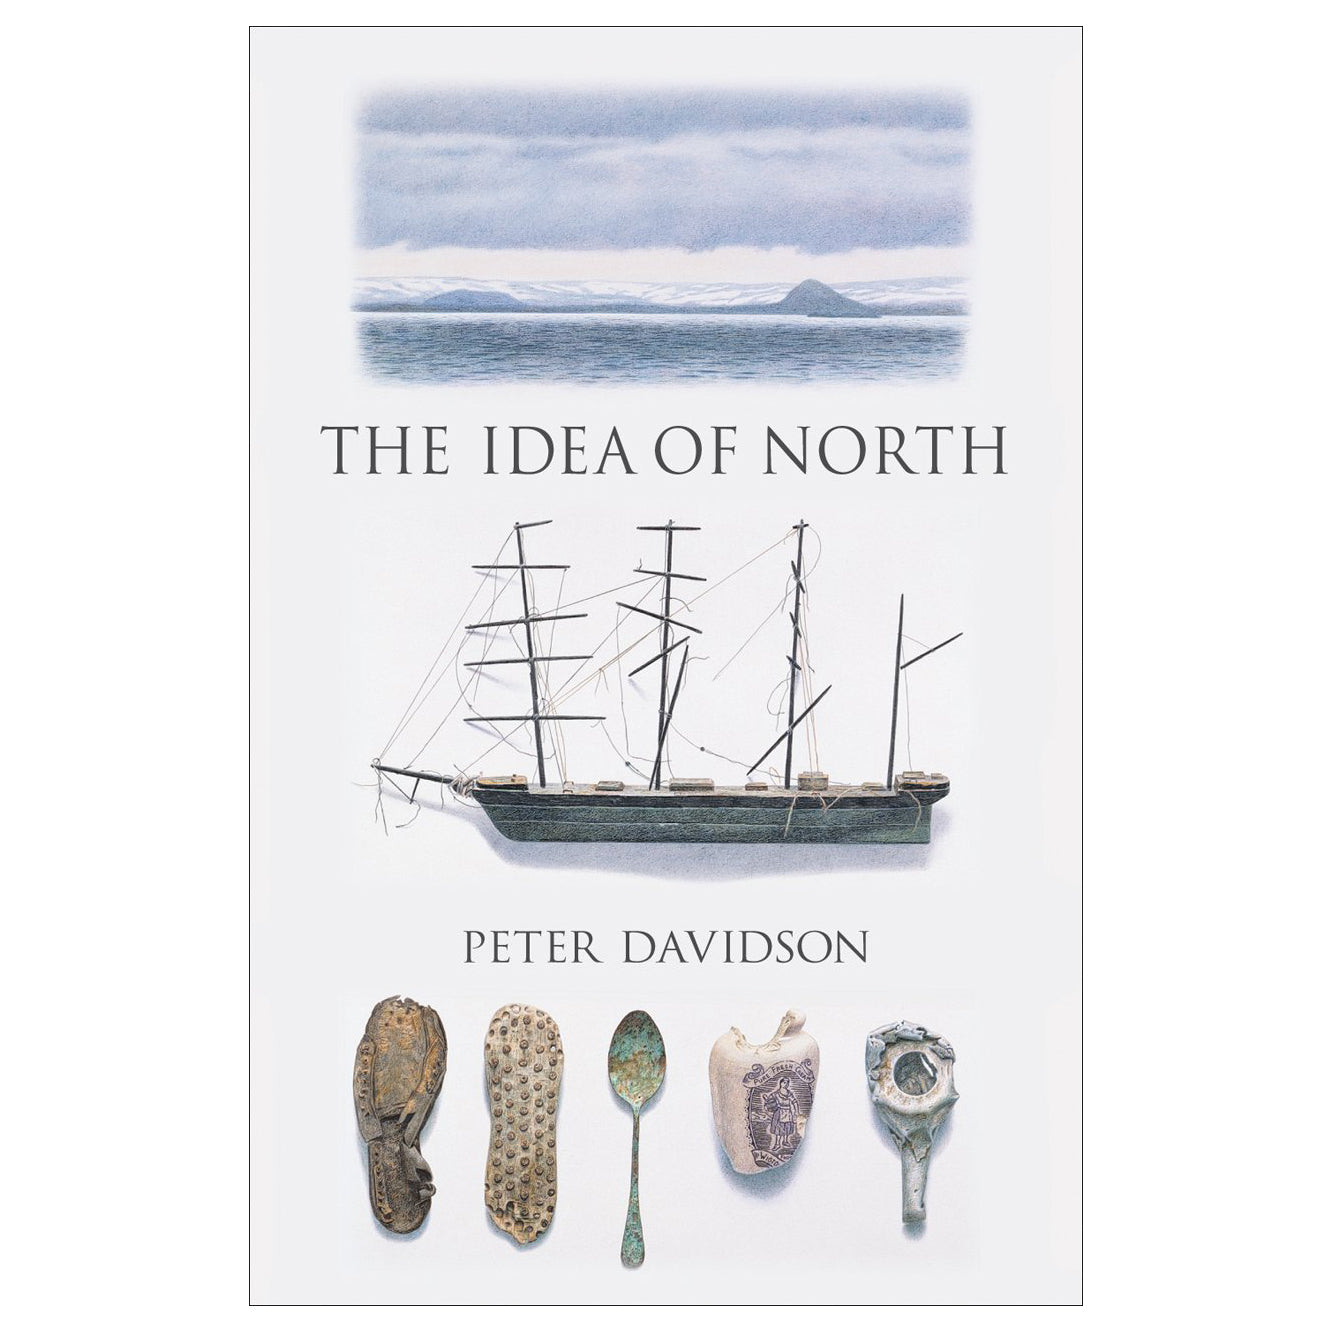 The Idea of the North by Peter Davidson